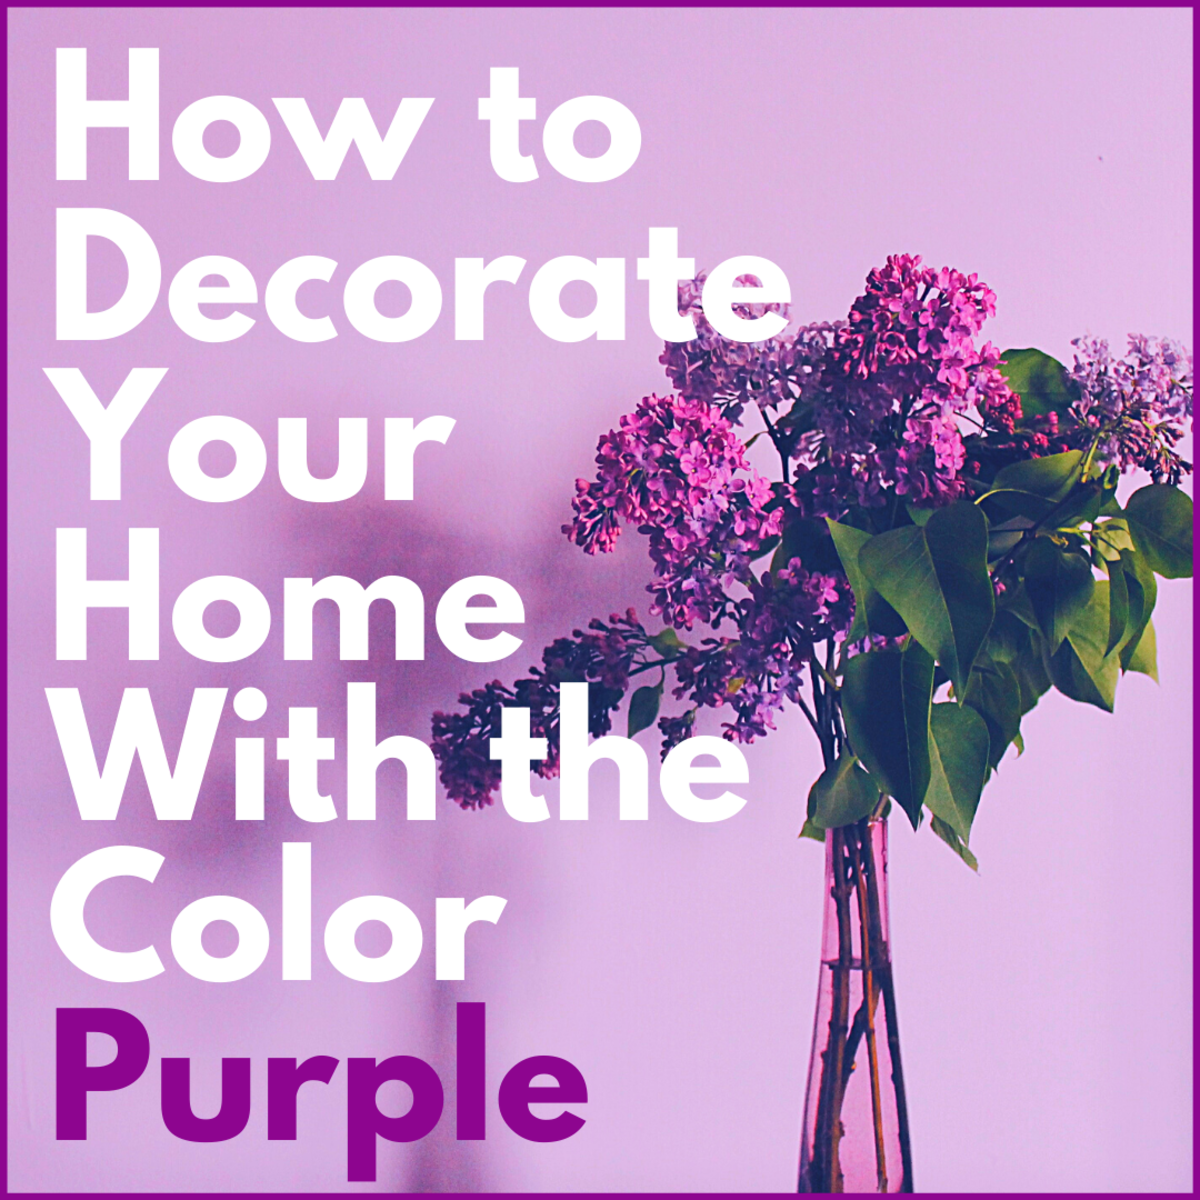 A purple living room? Why not? Be bold!